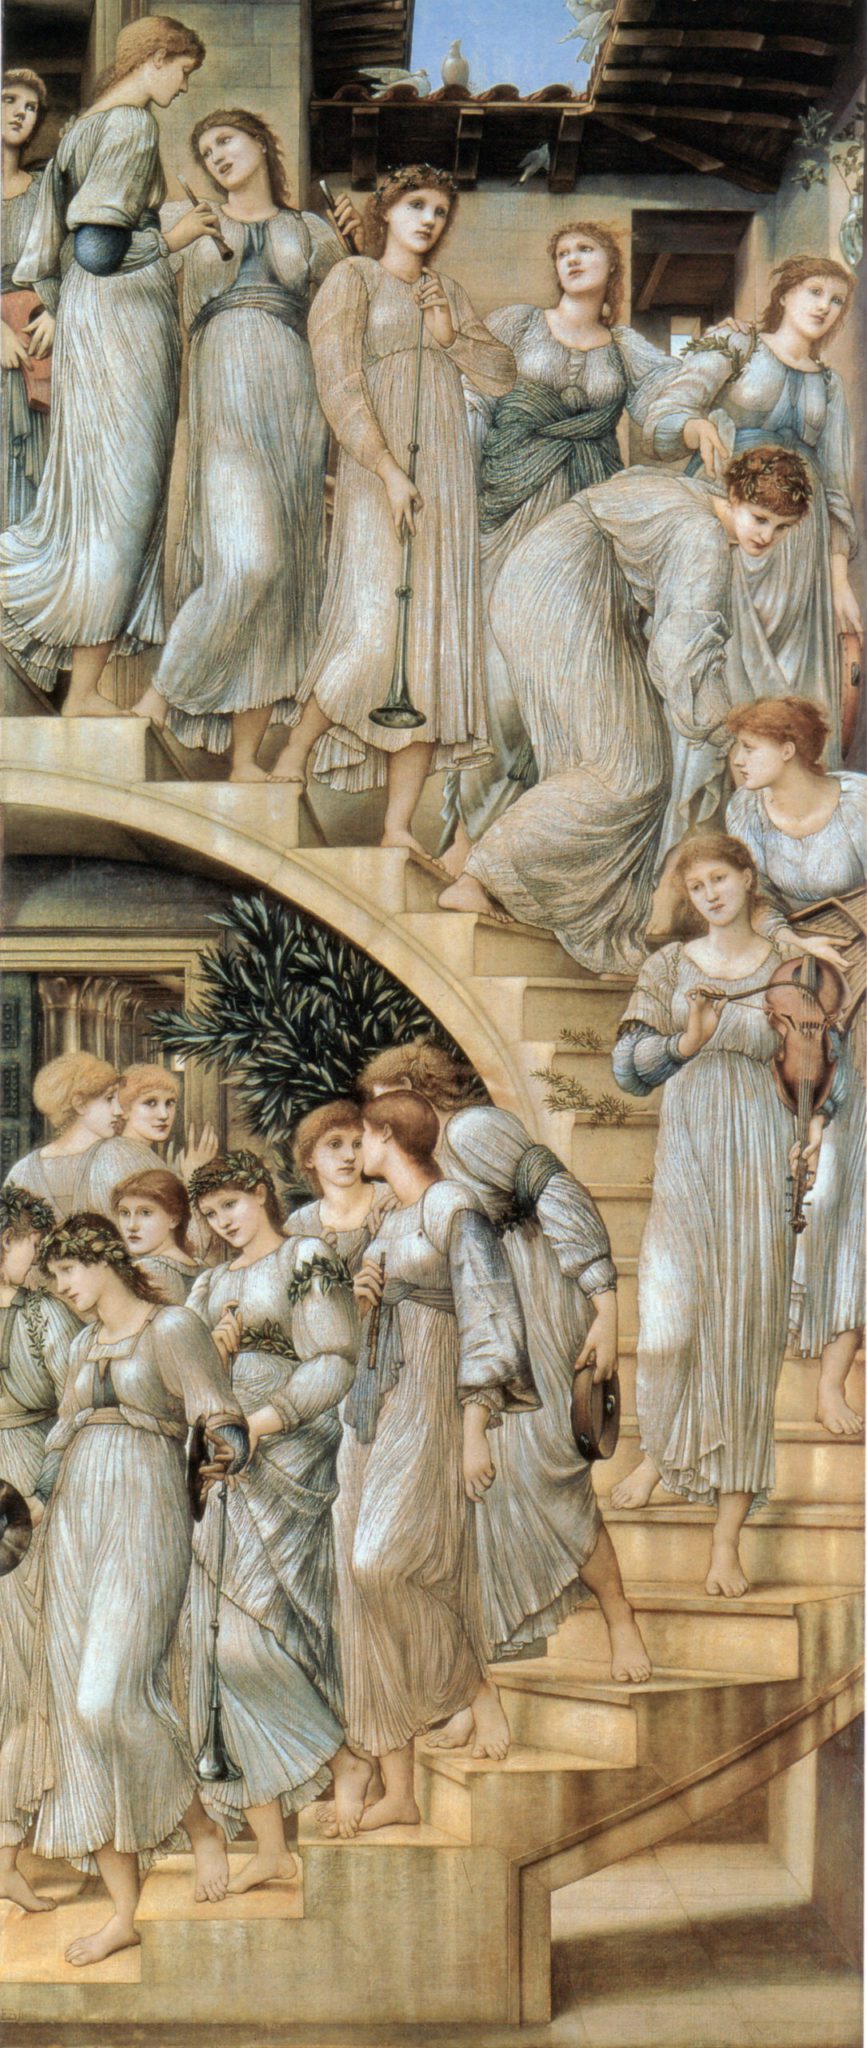 Photo of the Golden Stairs Painting by Edward Burne jones